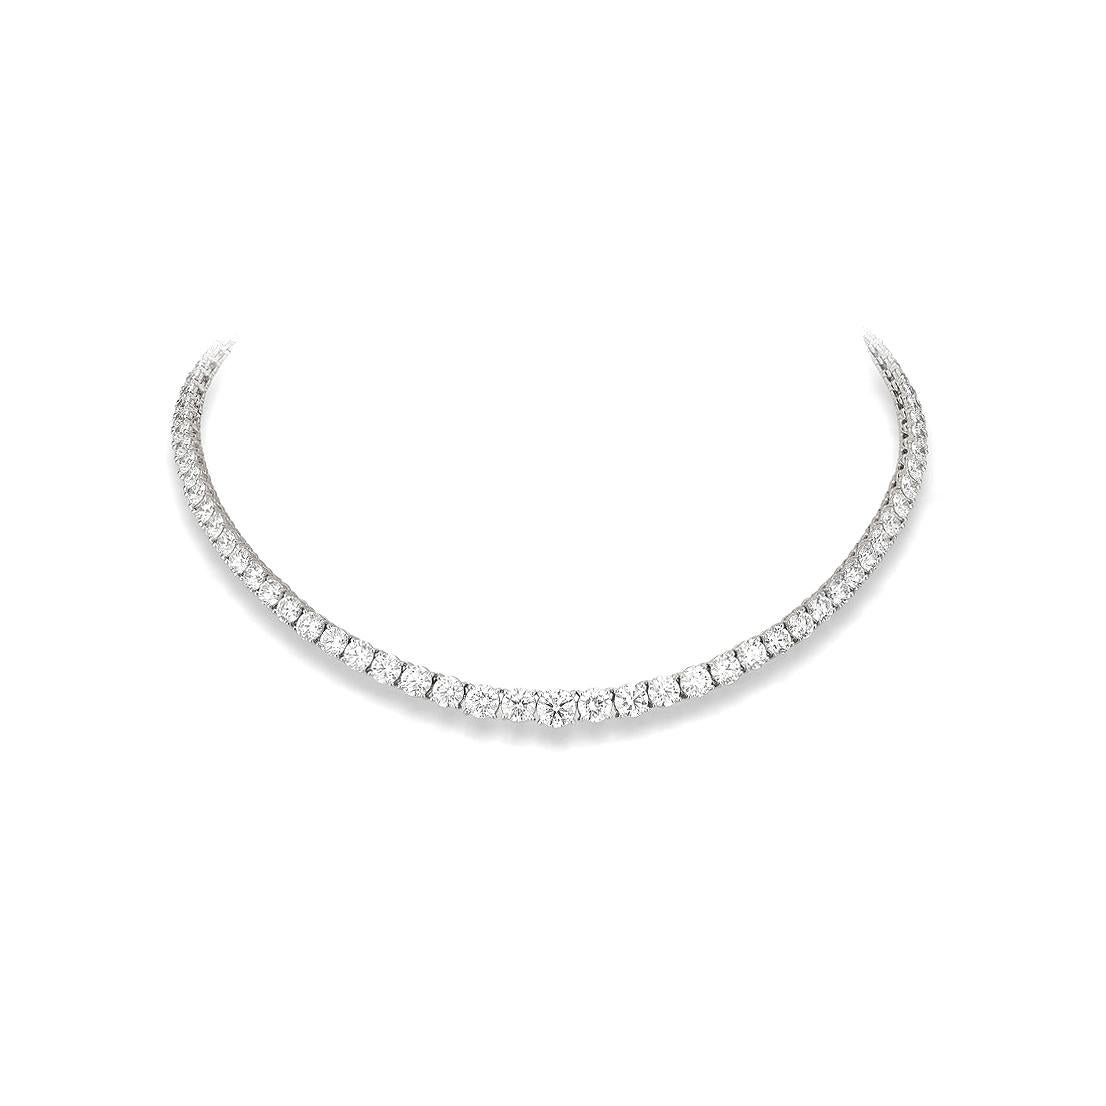 Necklace in 18kt white gold set with 87 diamonds 31.57 cts GIA Certificates